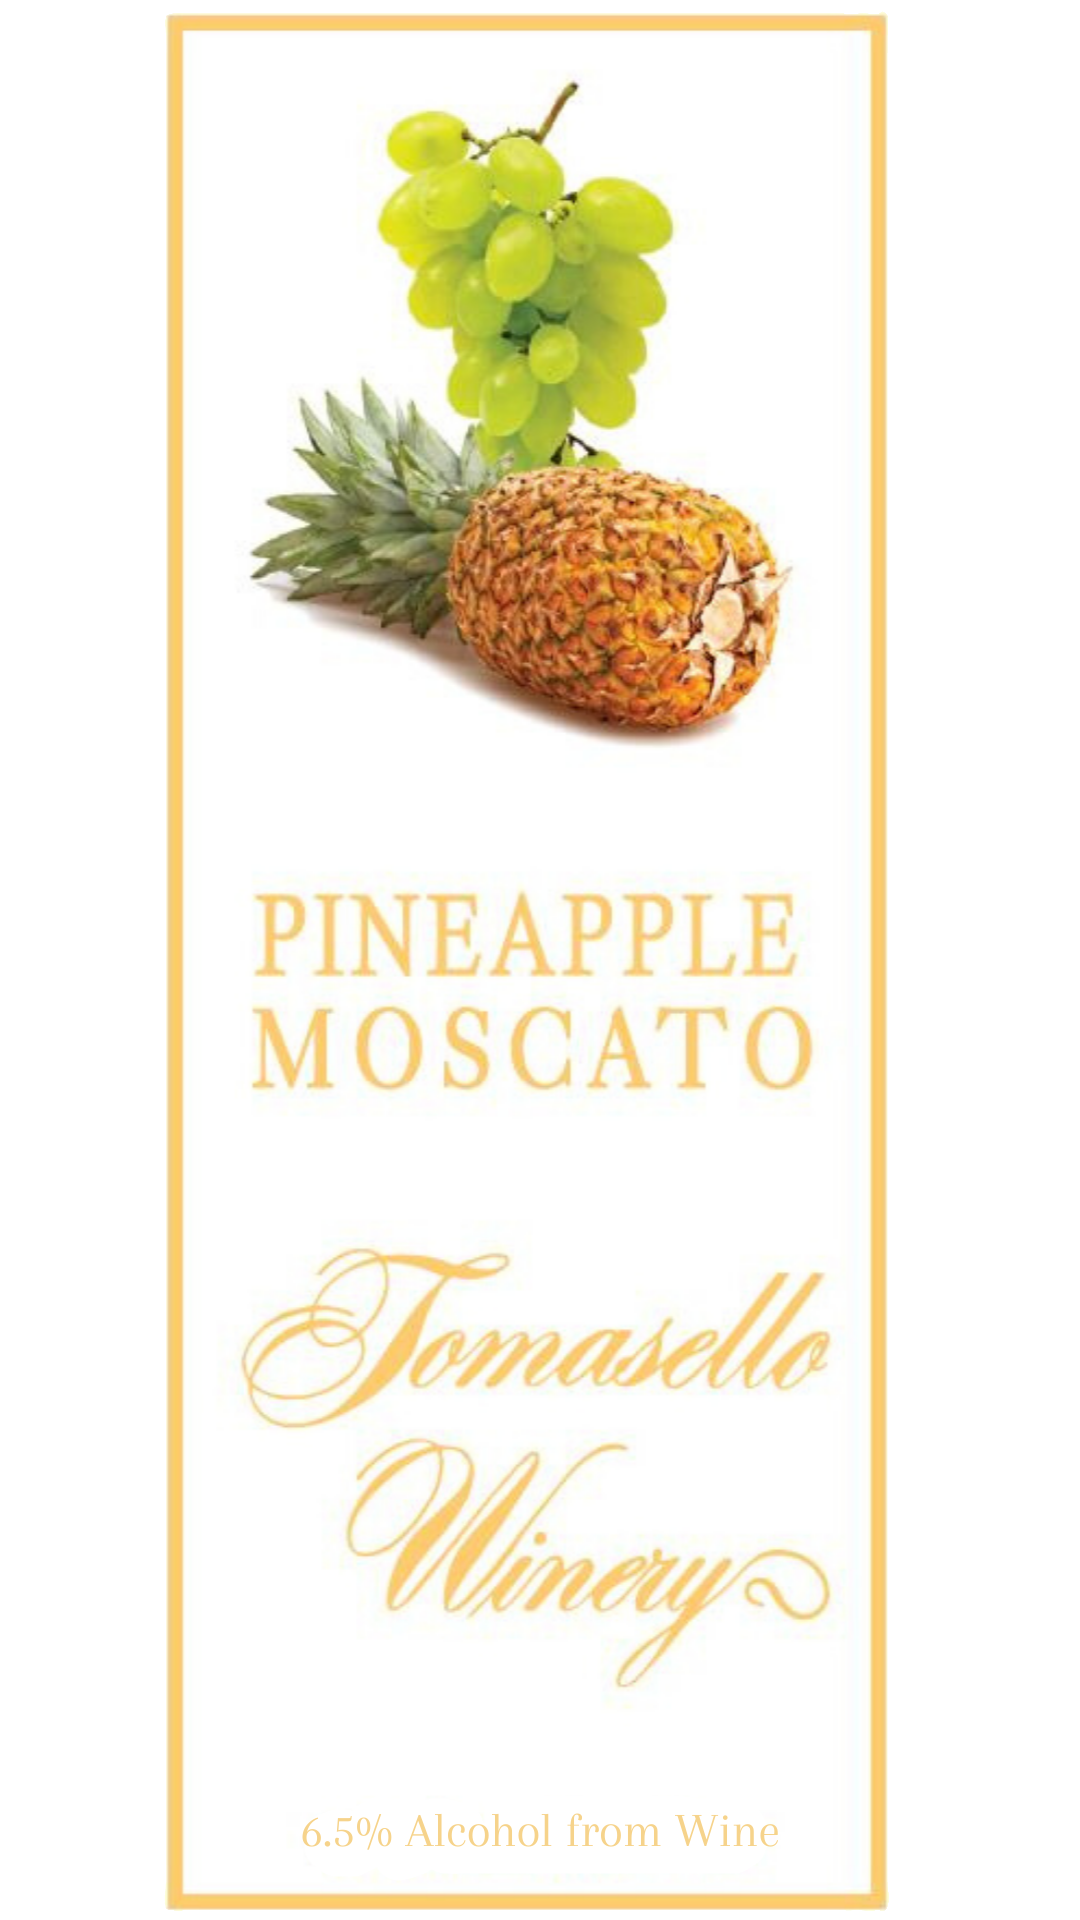 Product Image for Pineapple Moscato